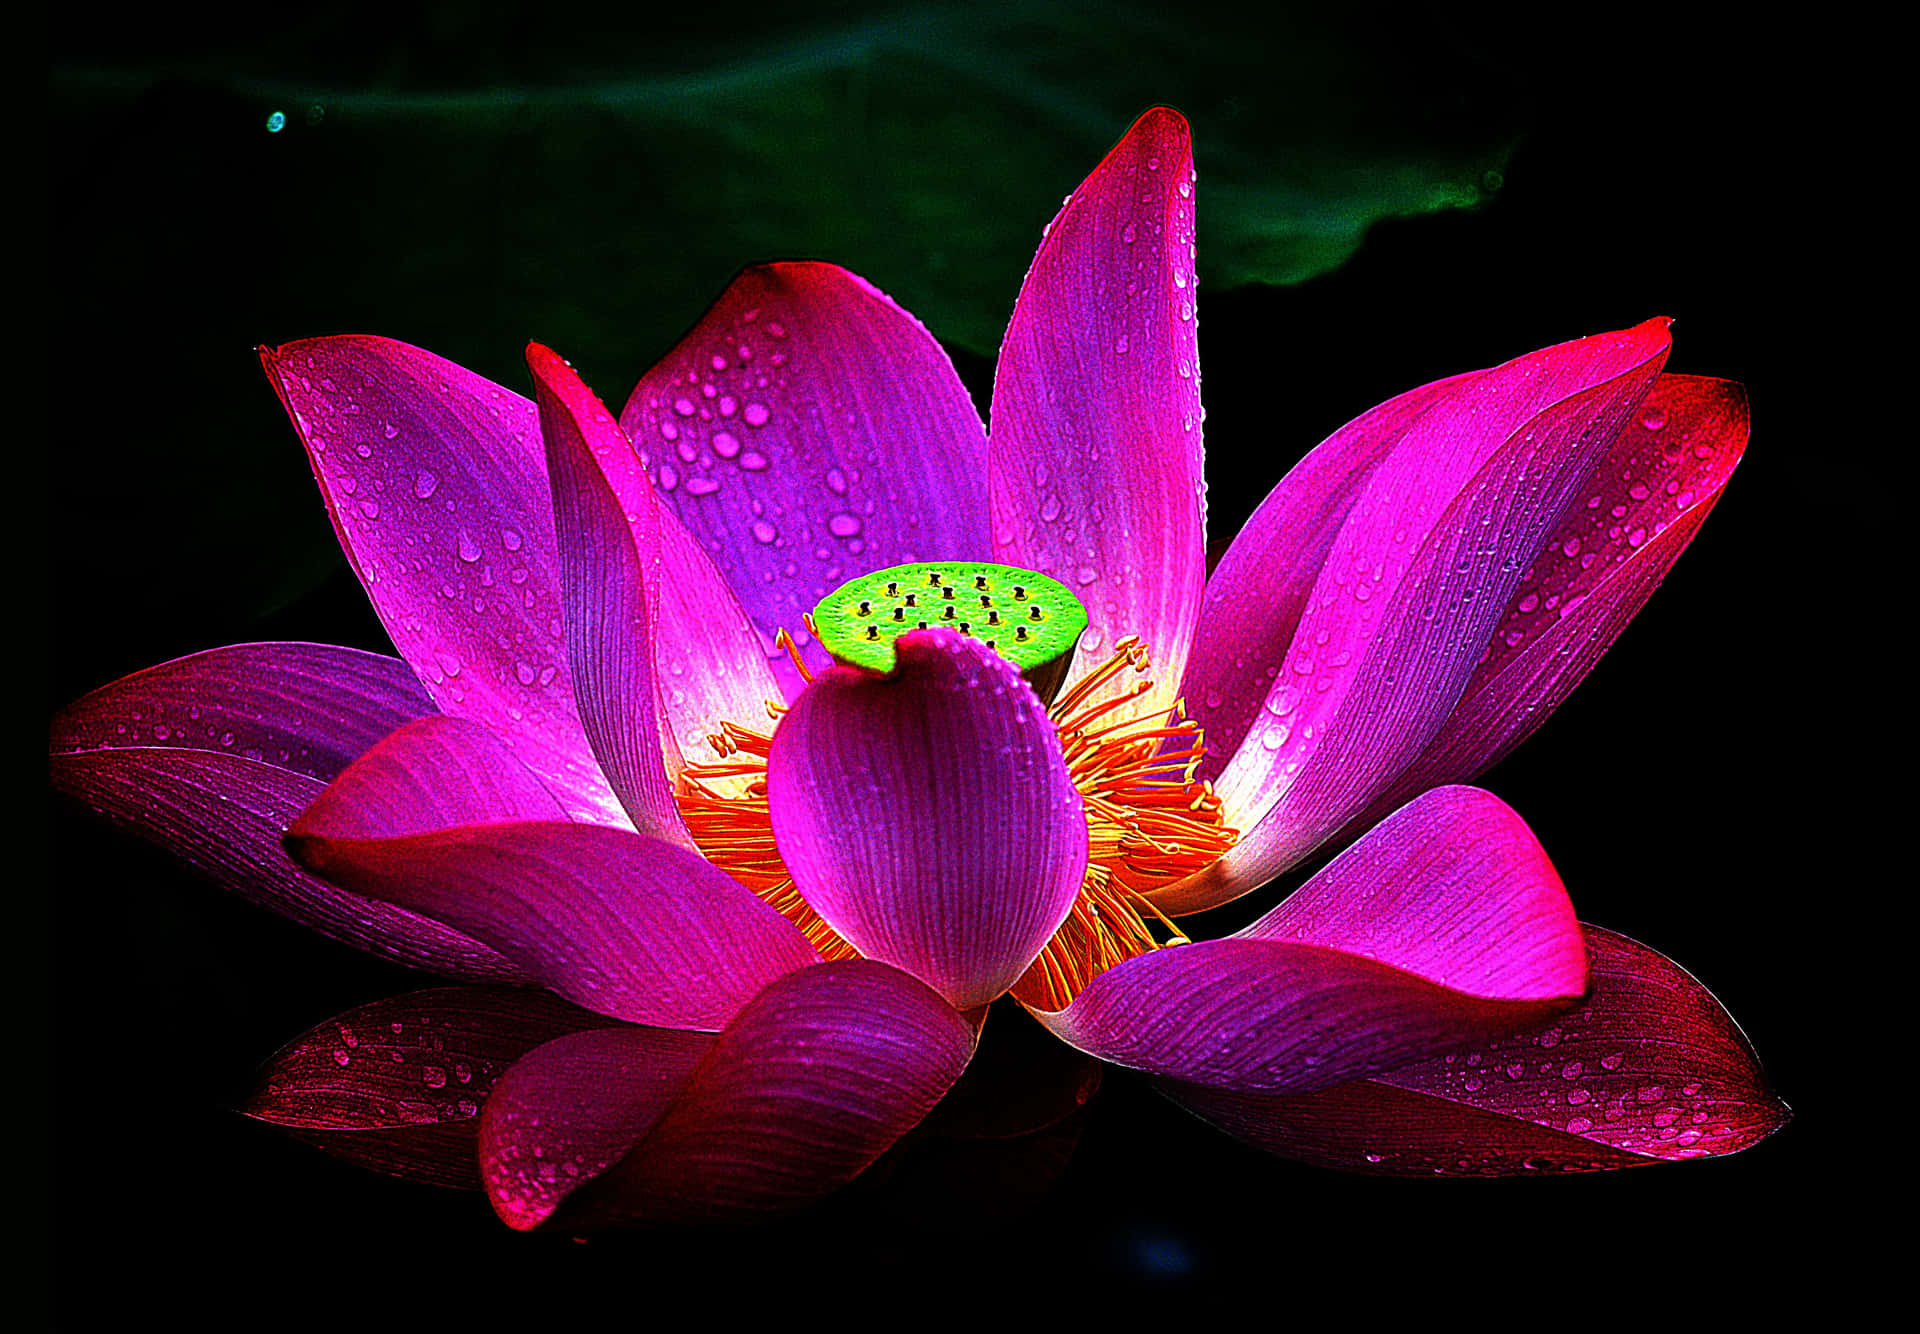 A Flowing White Lotus Flower in a Stream